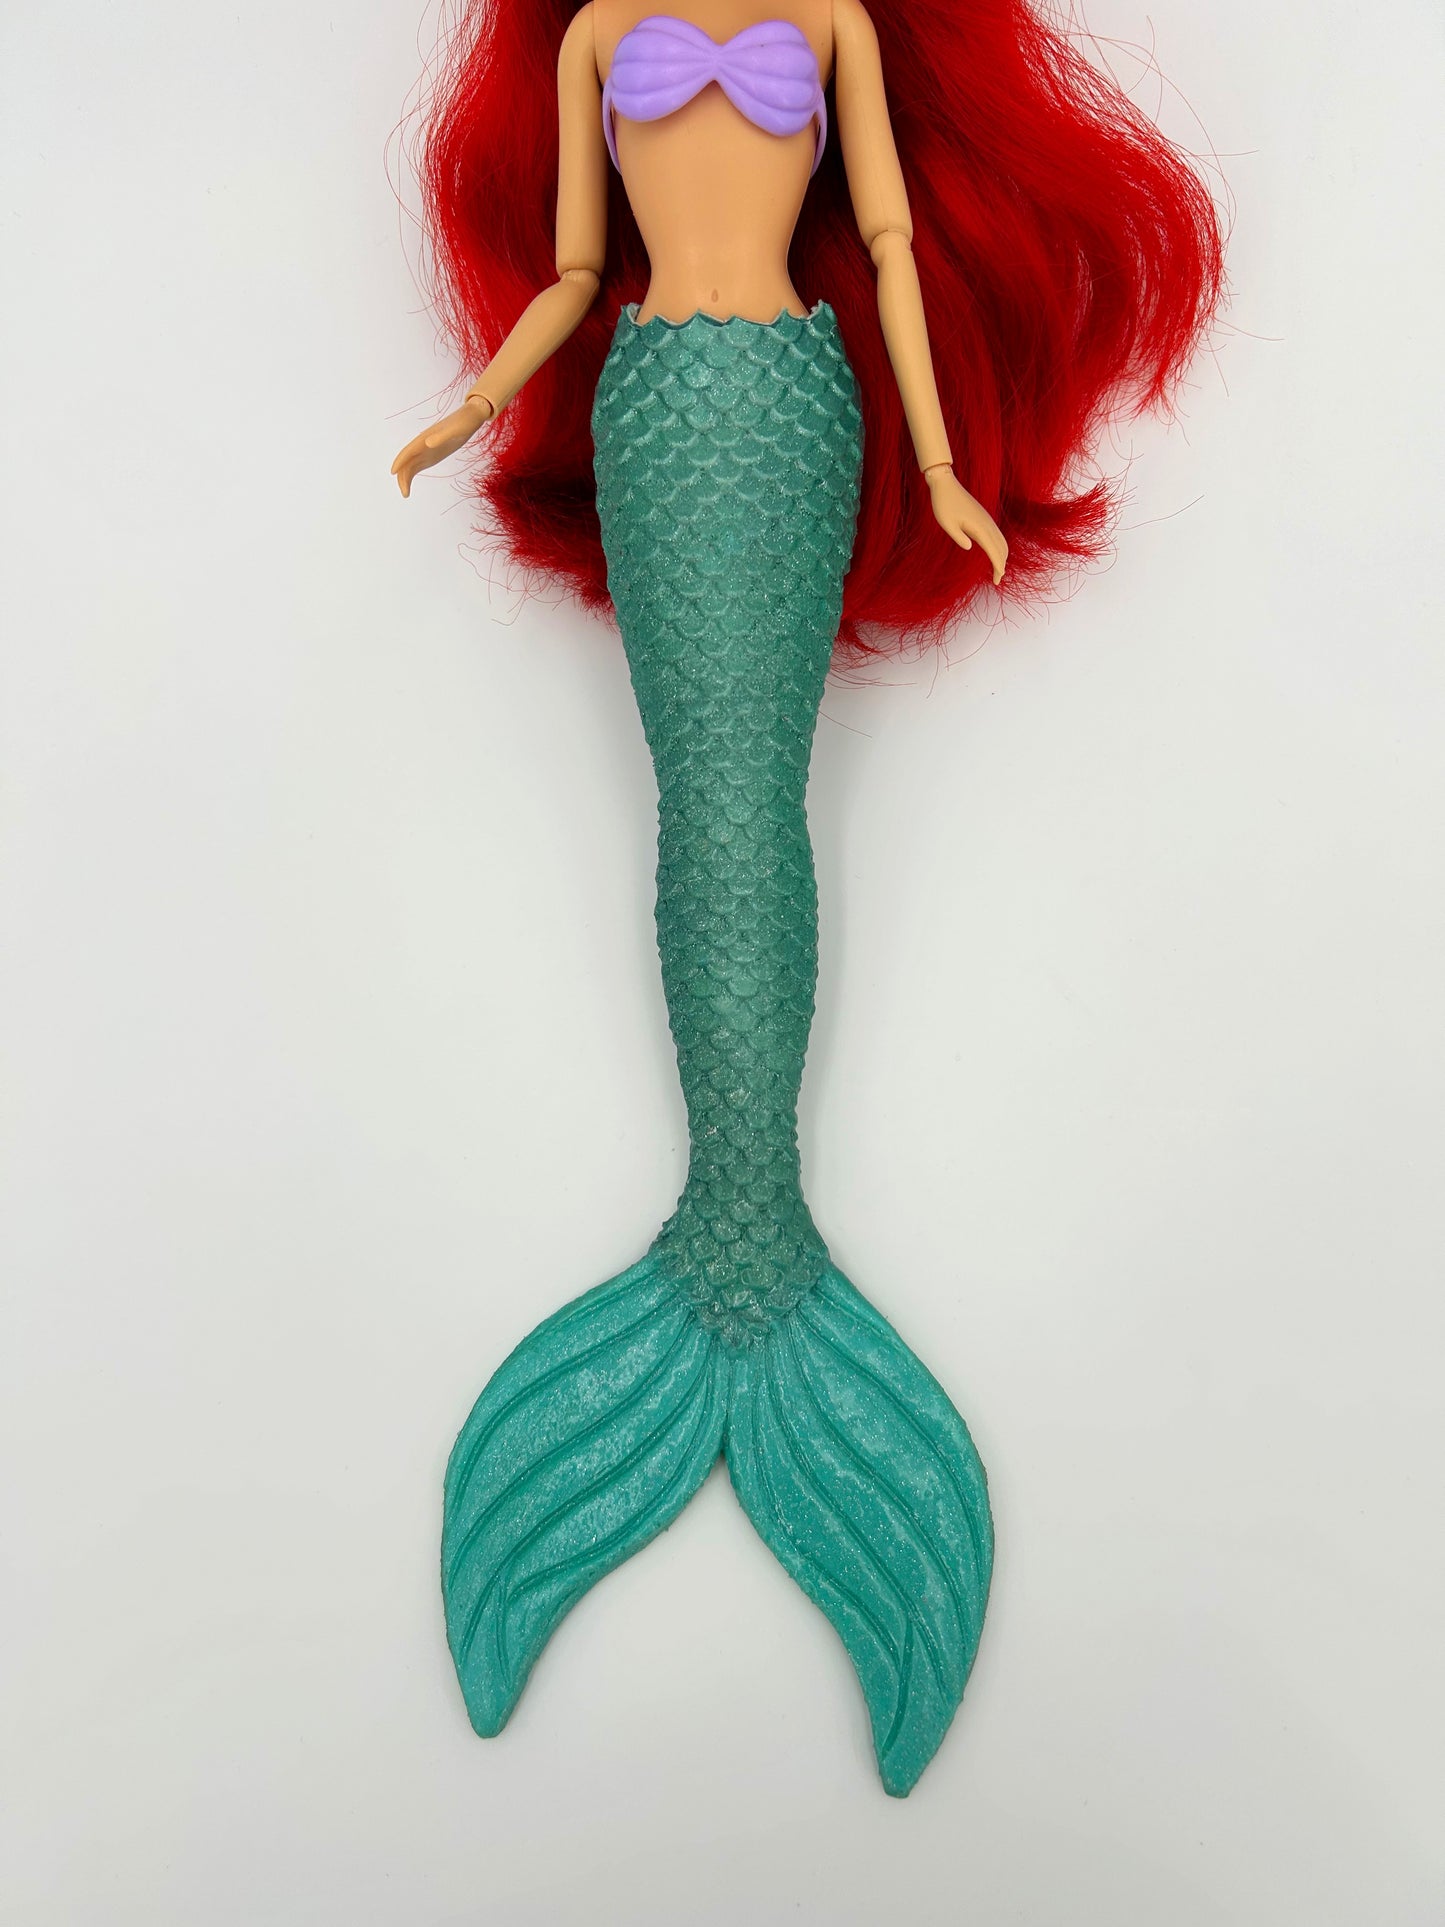 Ariel silicone mermaid tail for doll (doll not included)